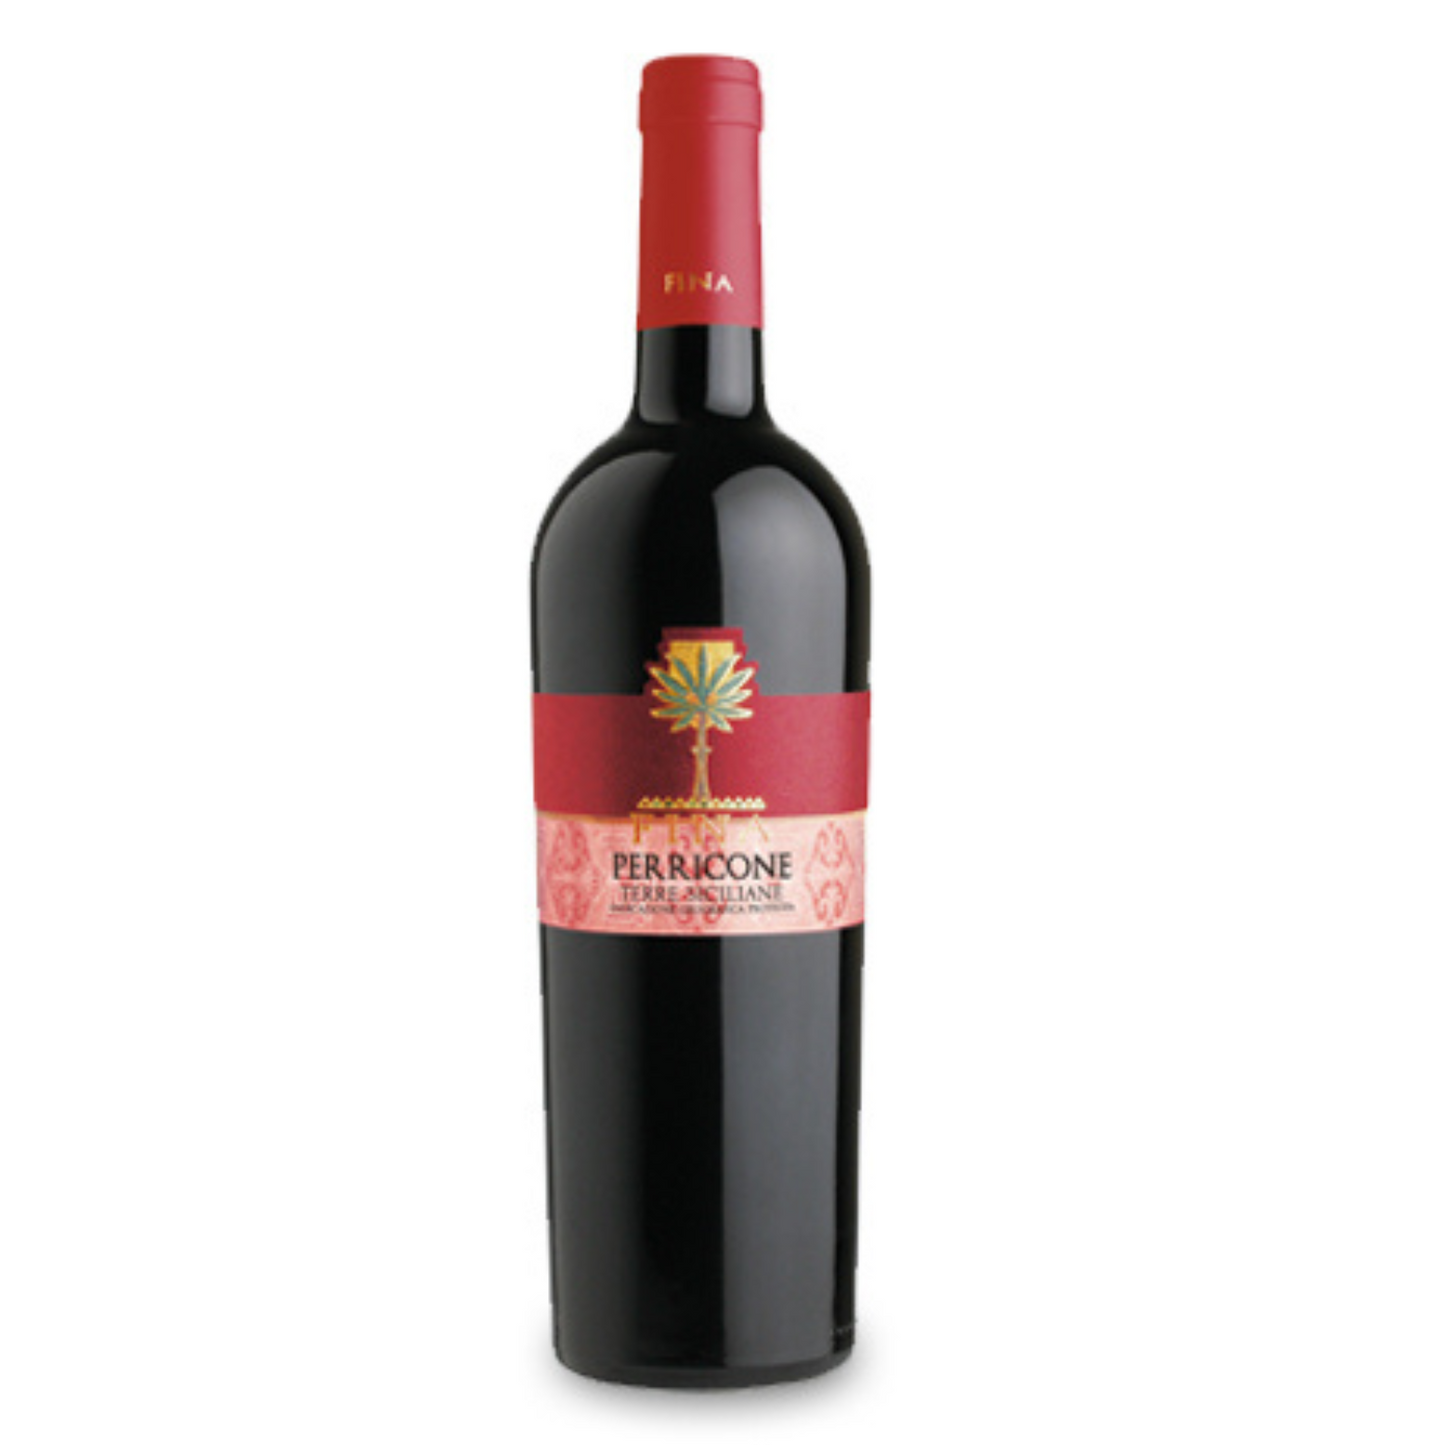 Perricone Sizilien Rotwein - 6 Flaschen - Cantine Fina